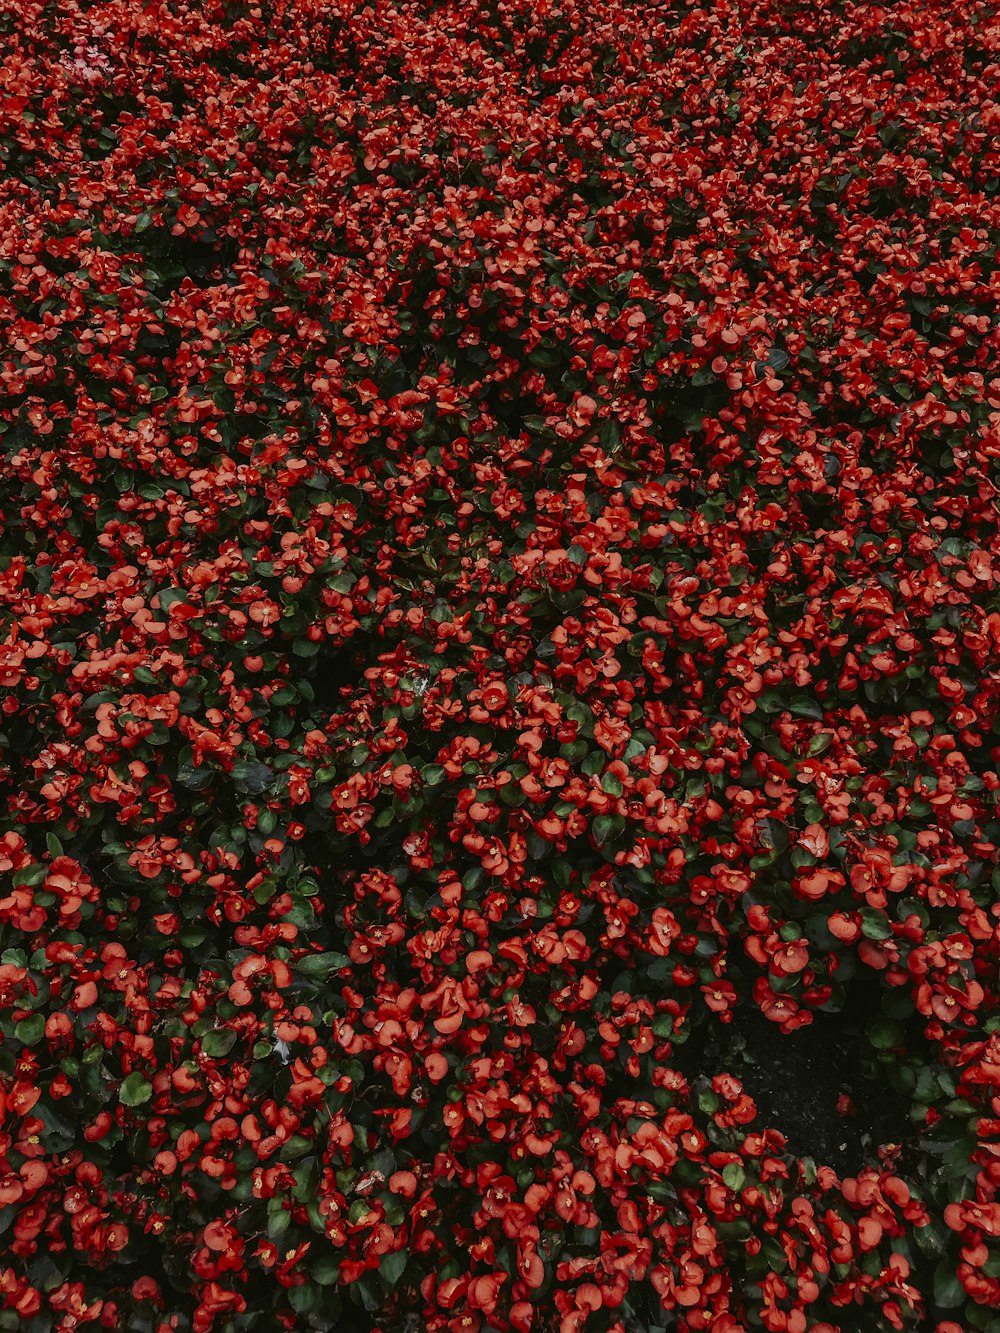 a field of red flowers with green leaves